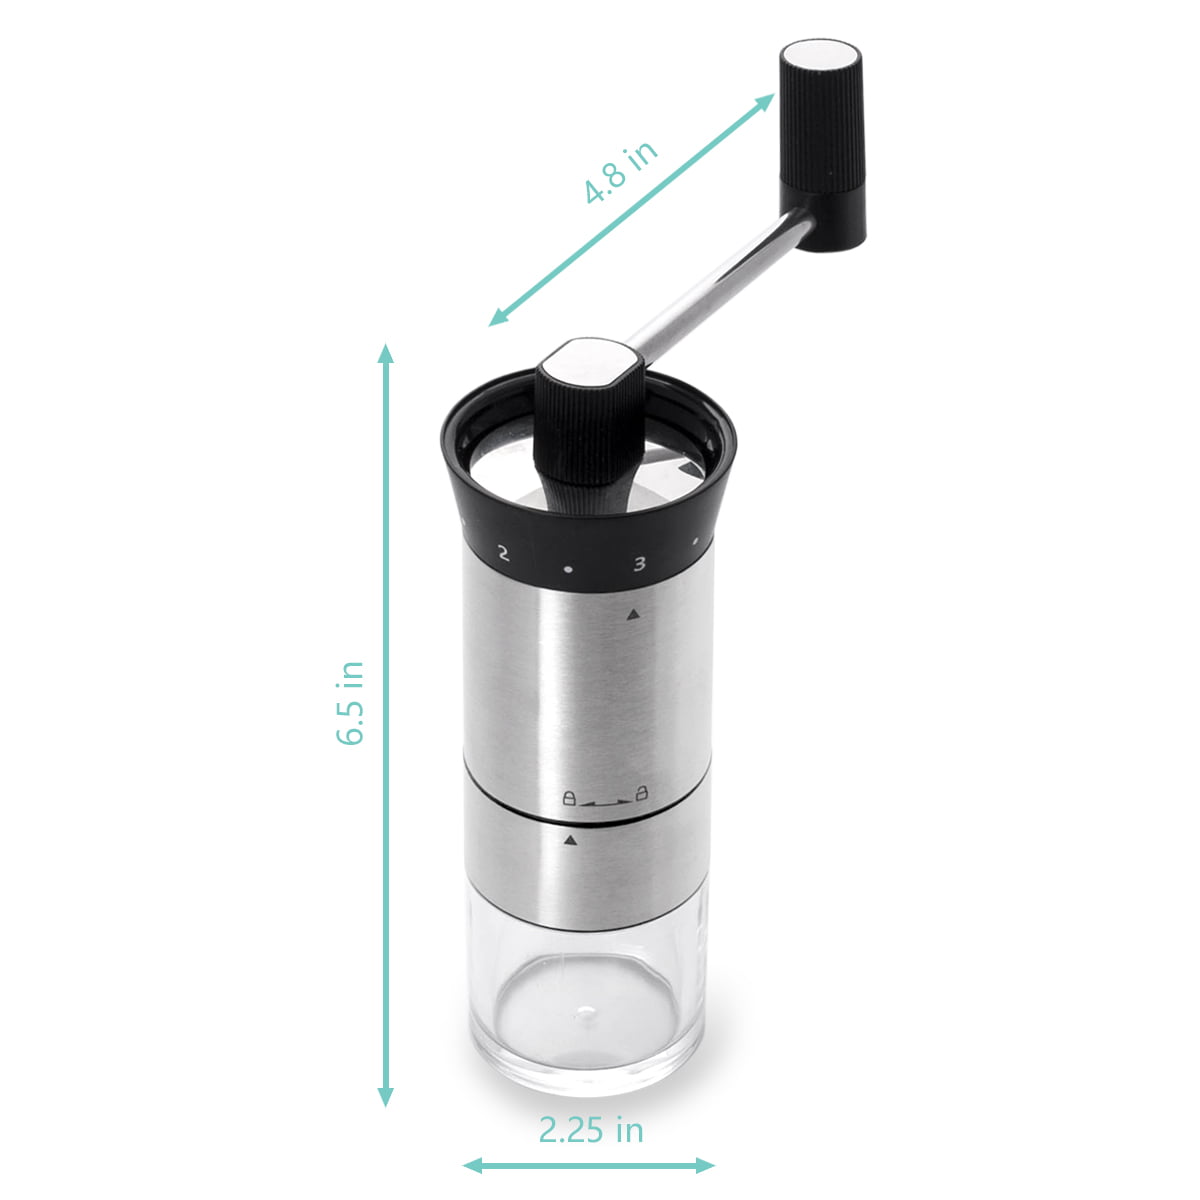 Manual Coffee Grinder - Manual Spice Grinder - Constructed of Stainless  Steel with a Ceramic Burr Grinder – Blue Sage Family Farm